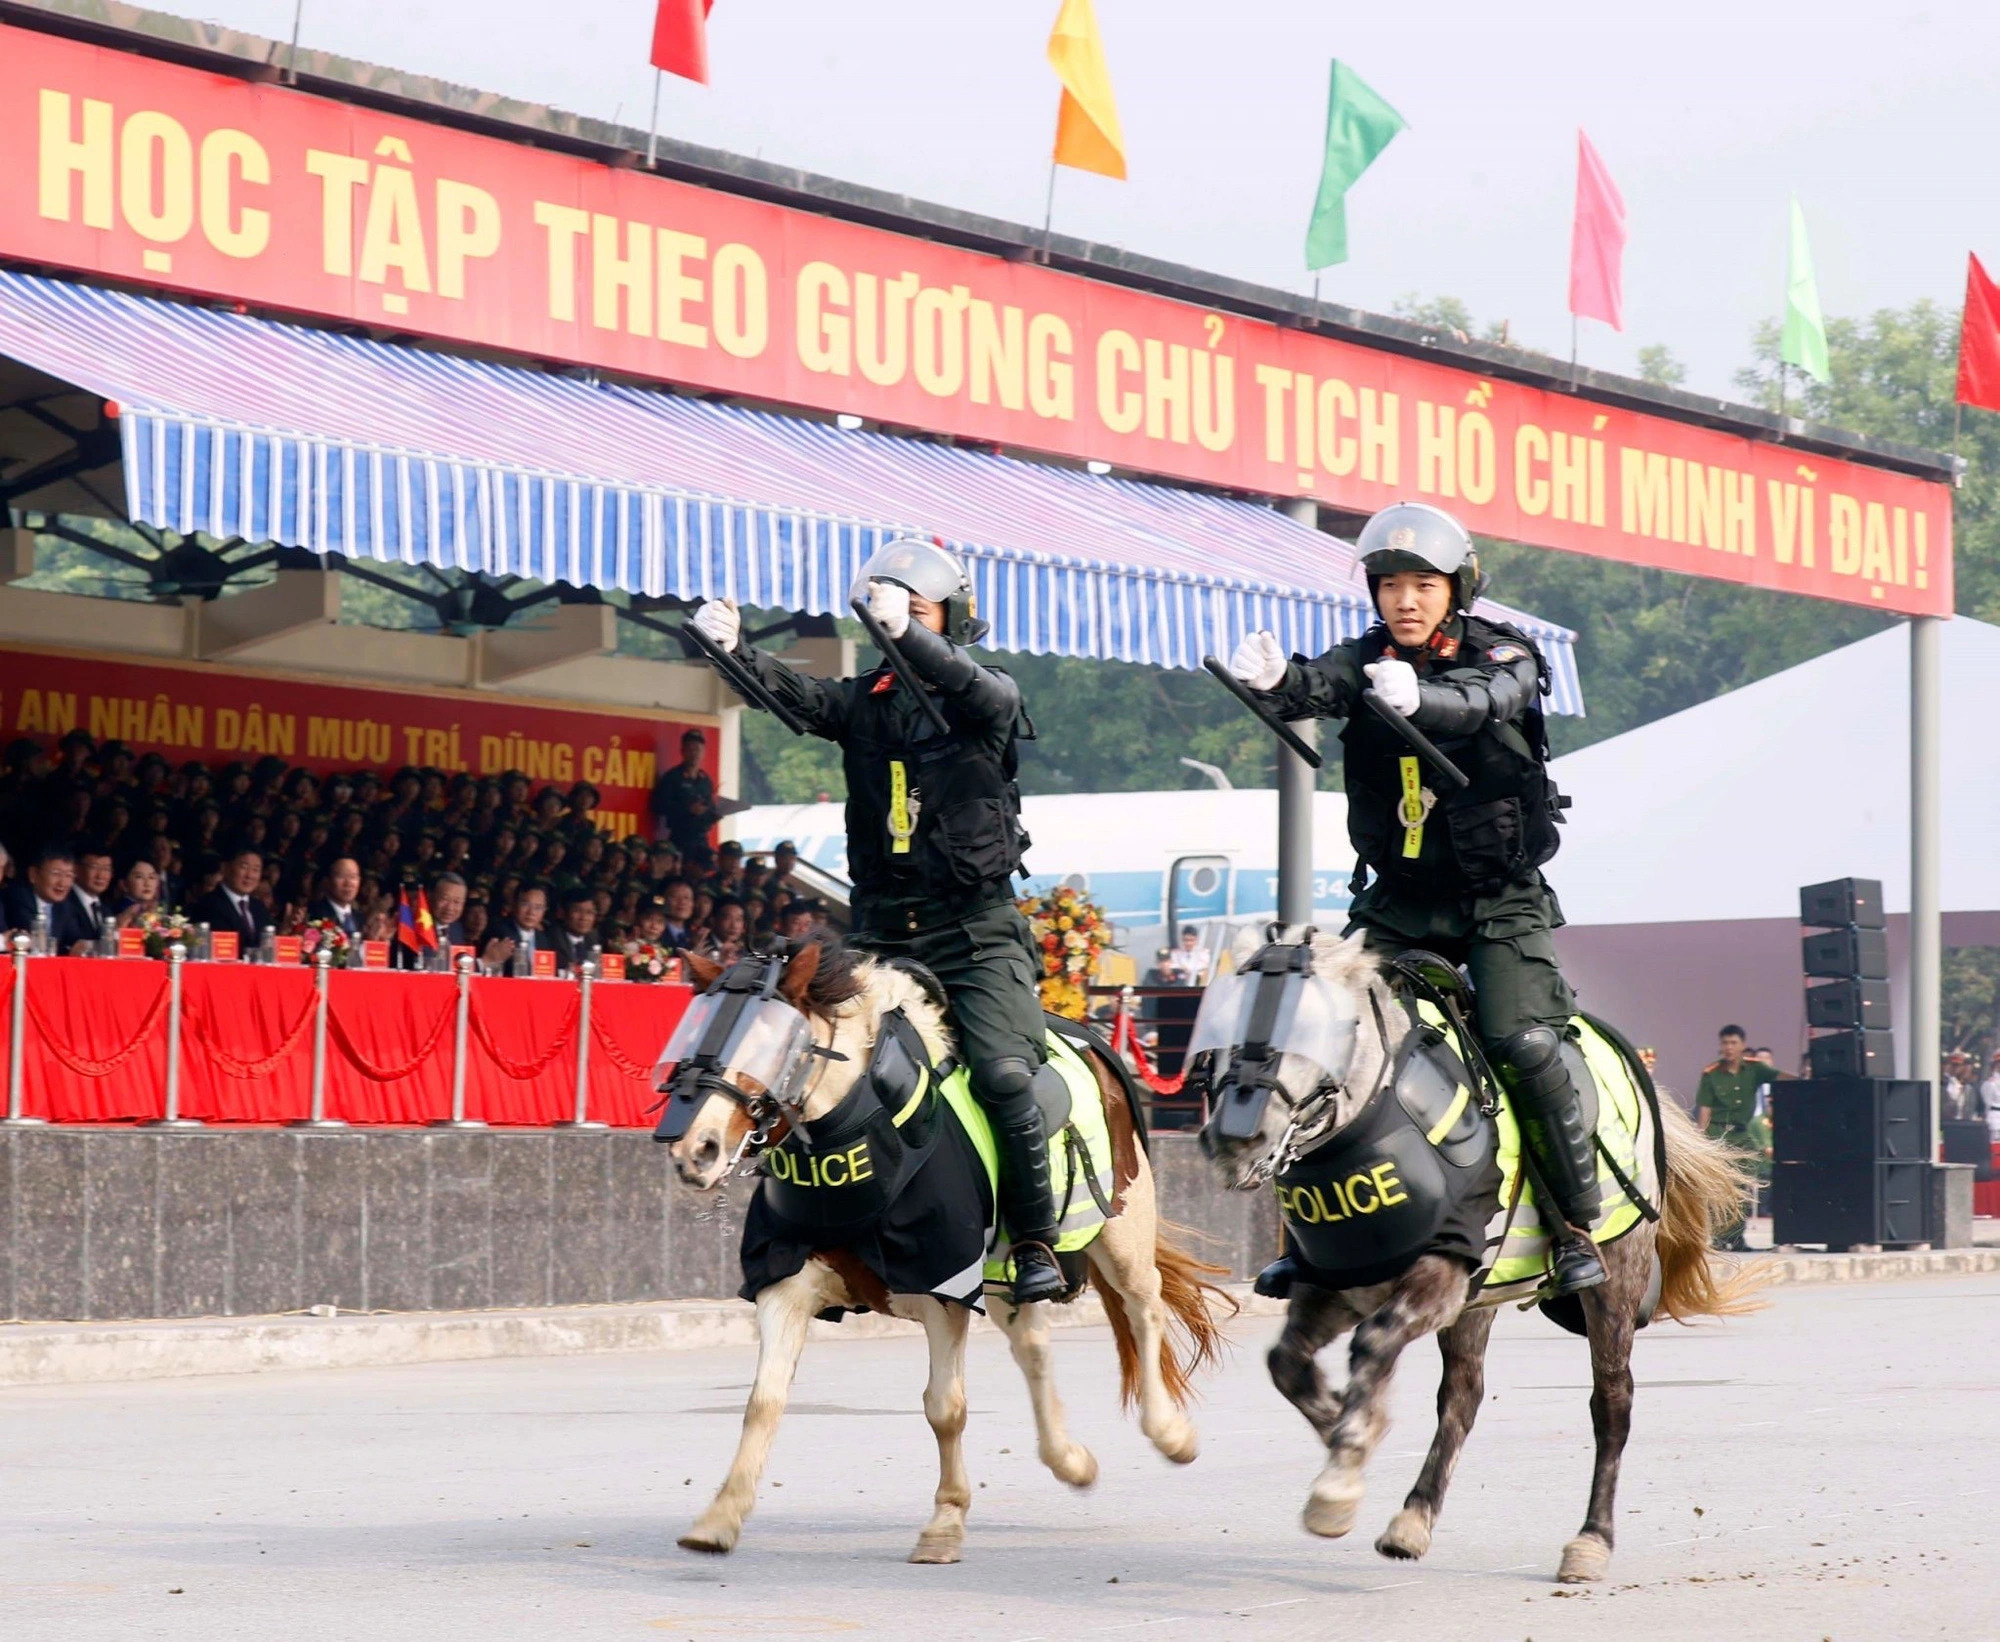 Mounted police officers perform martial arts on horseback. Photo: Vietnam News Agency